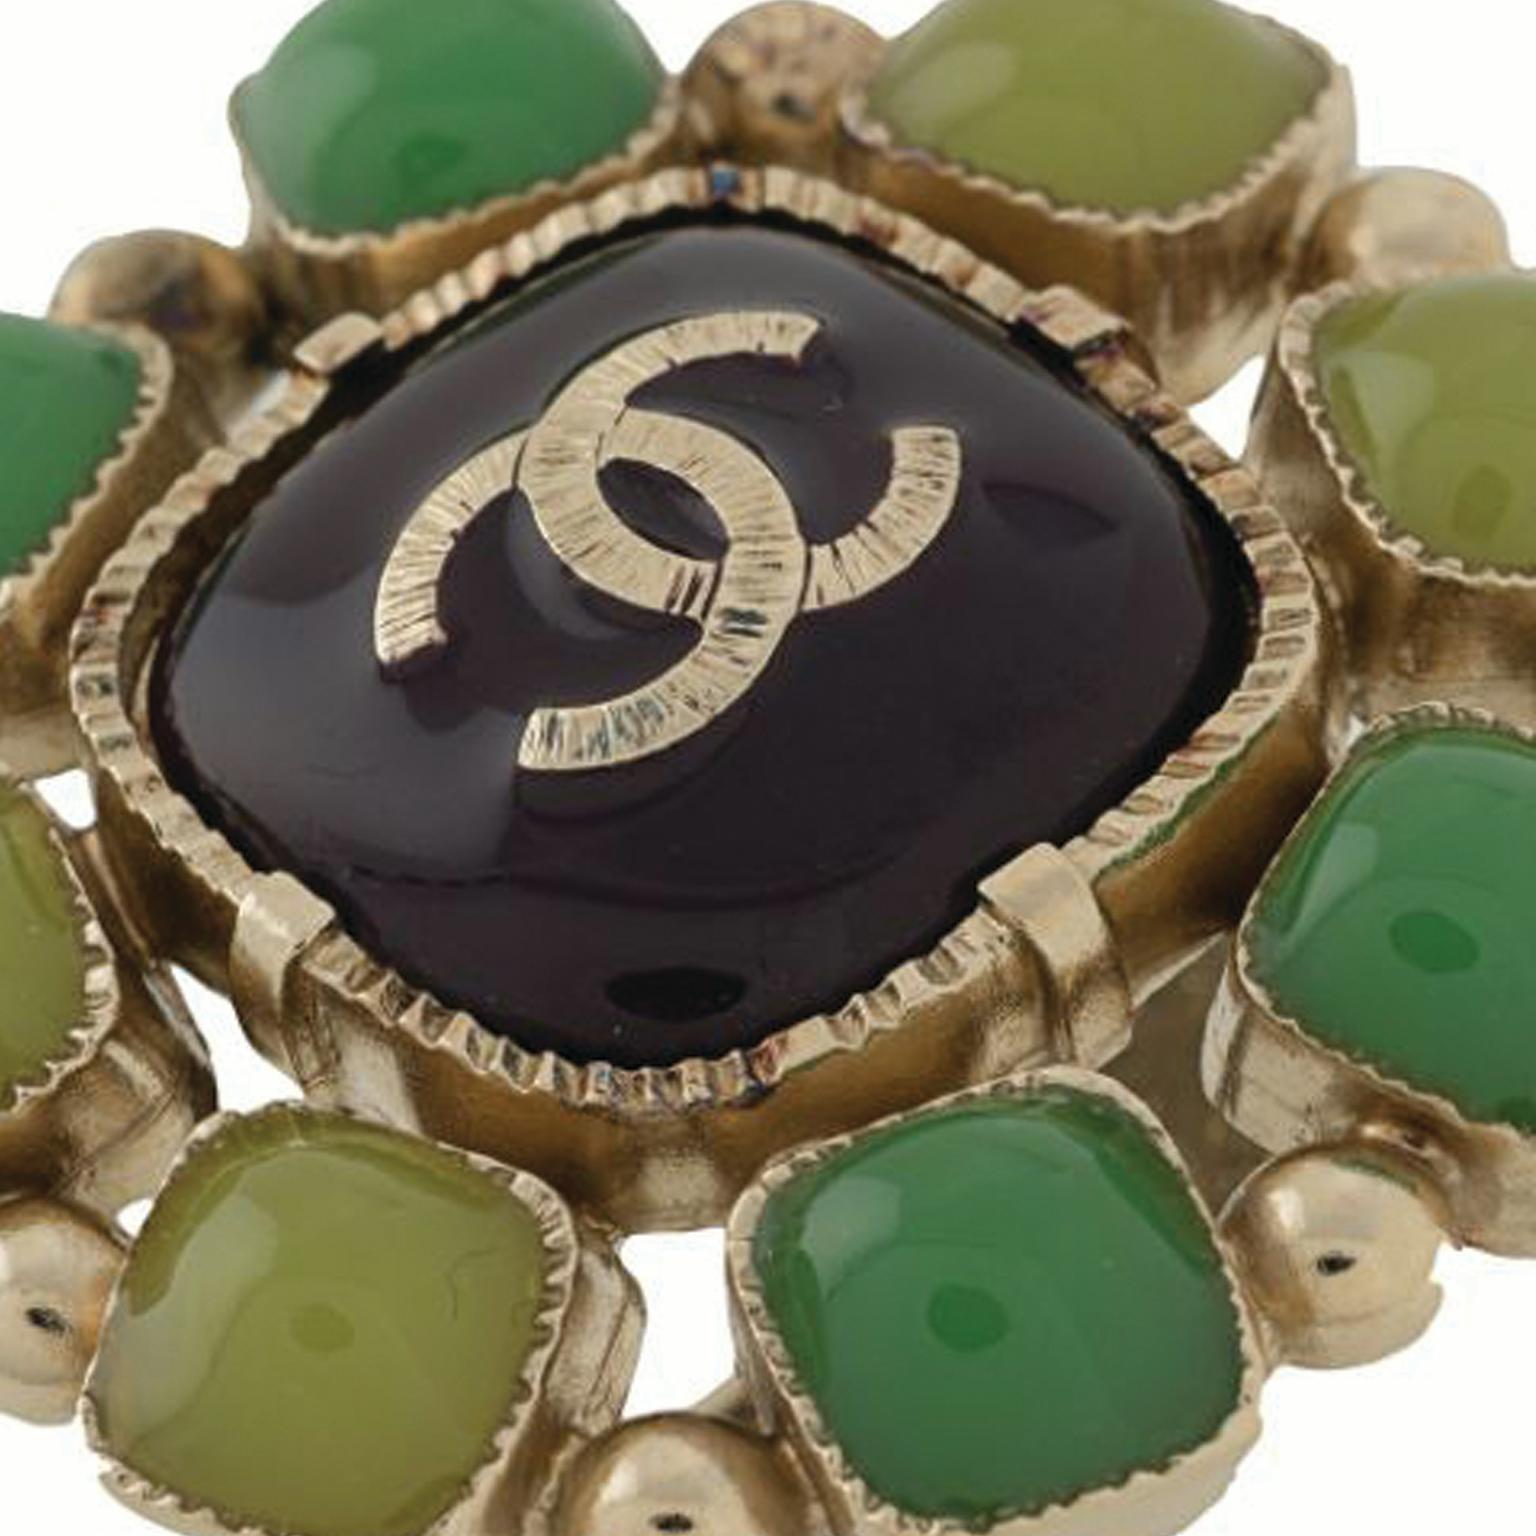 A bold and striking ring from Chanel. Crafted from stones in hues of green on a gold-toned metal, with the iconic interlocking CC logo placed centrally for all to admire.

Colour: Green & Gold

Composition: Metal & Stone

Condition: Excellent